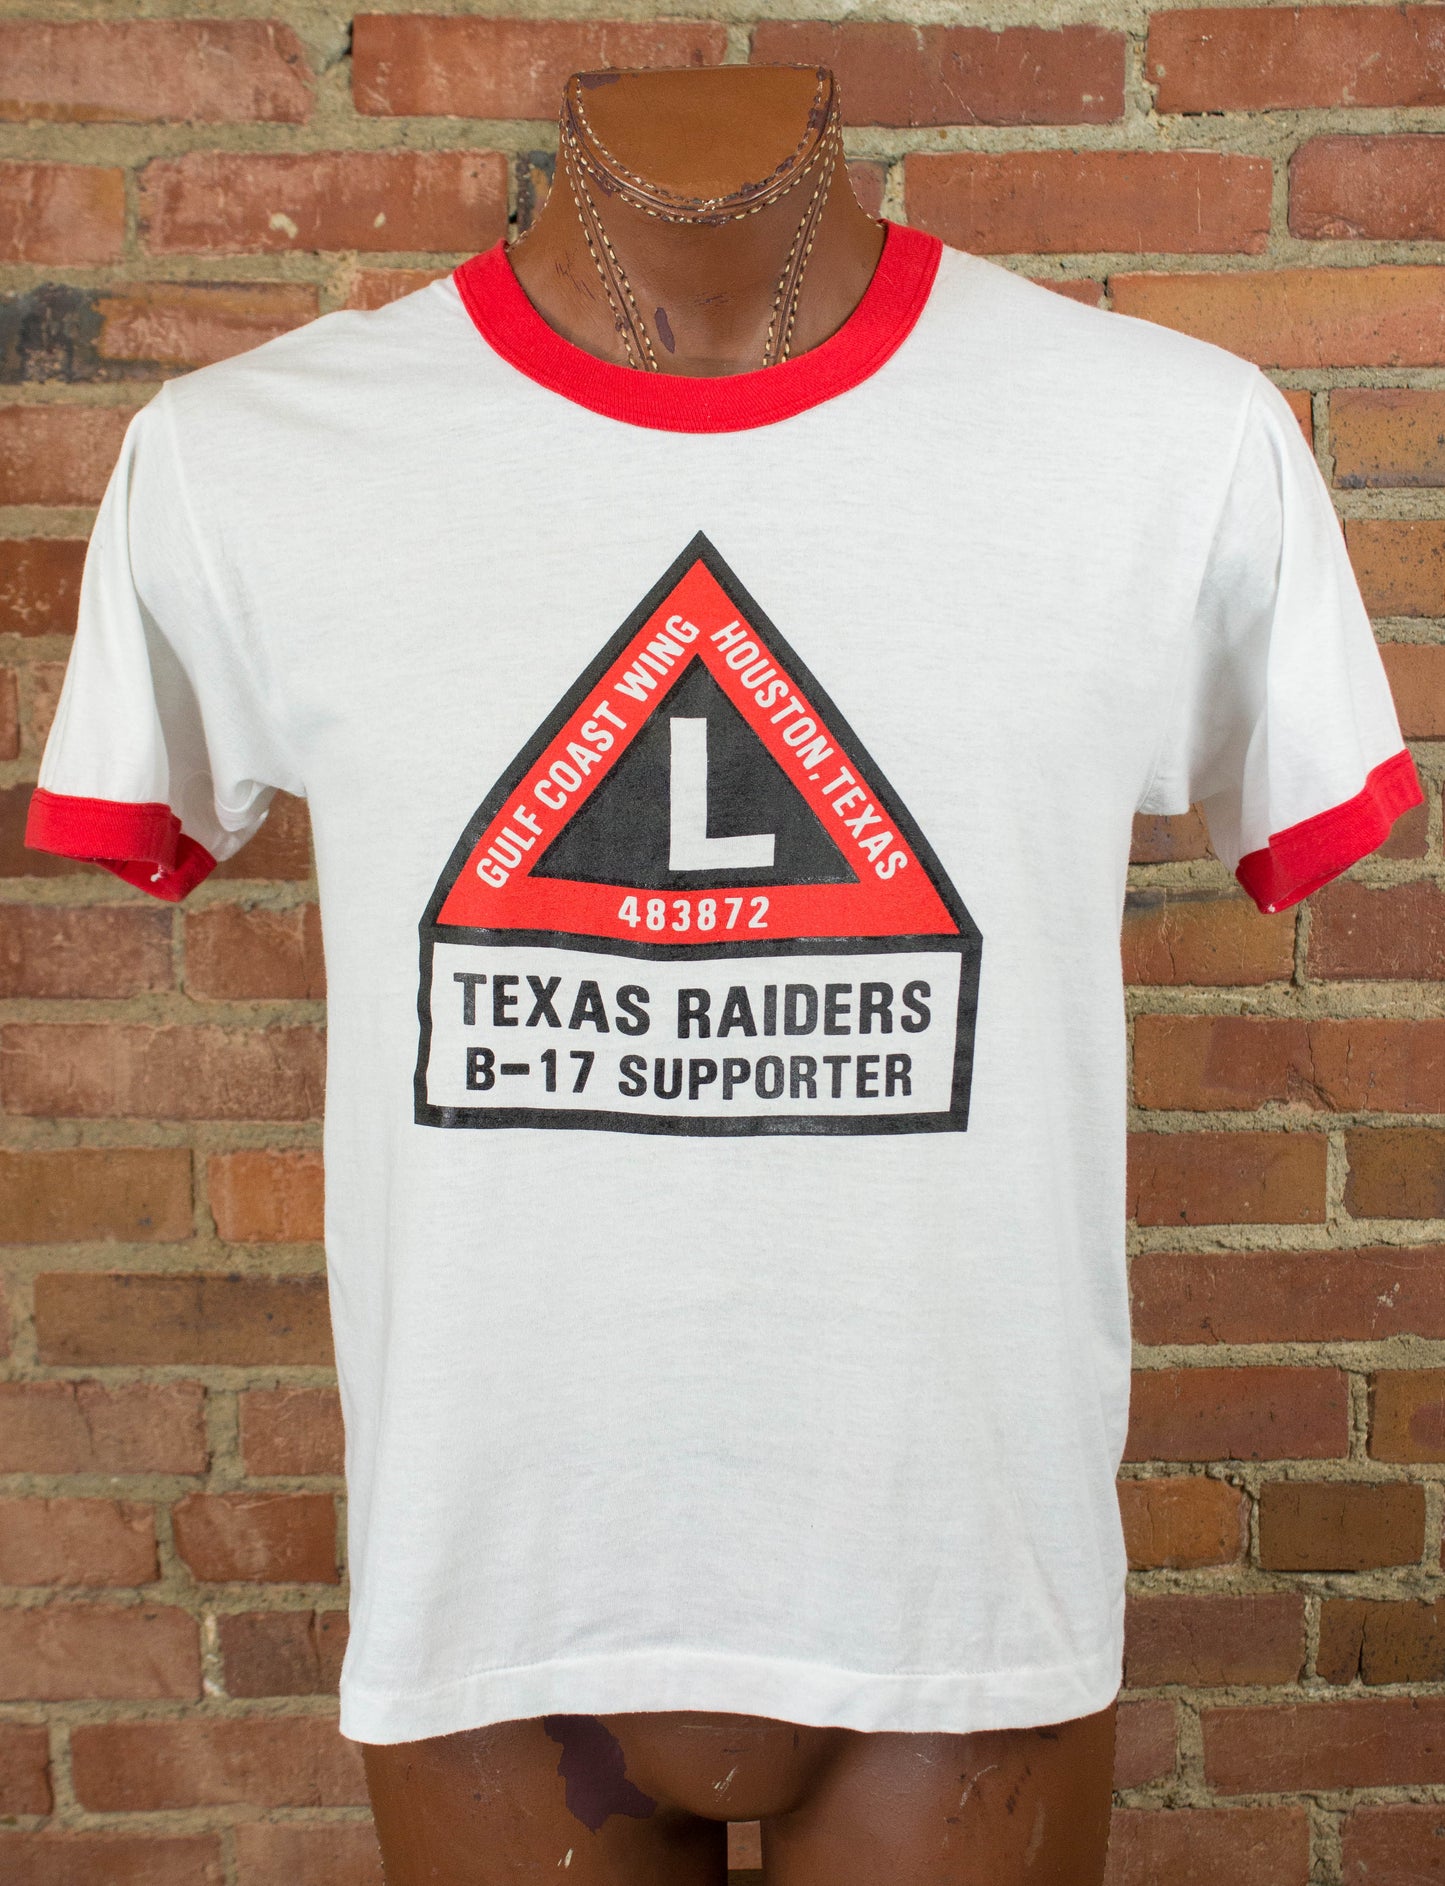 Vintage 80s Texas Raiders B-17 Supporter Gulf Coast Wing White and Red Graphic Ringer T Shirt Unisex Medium-Large